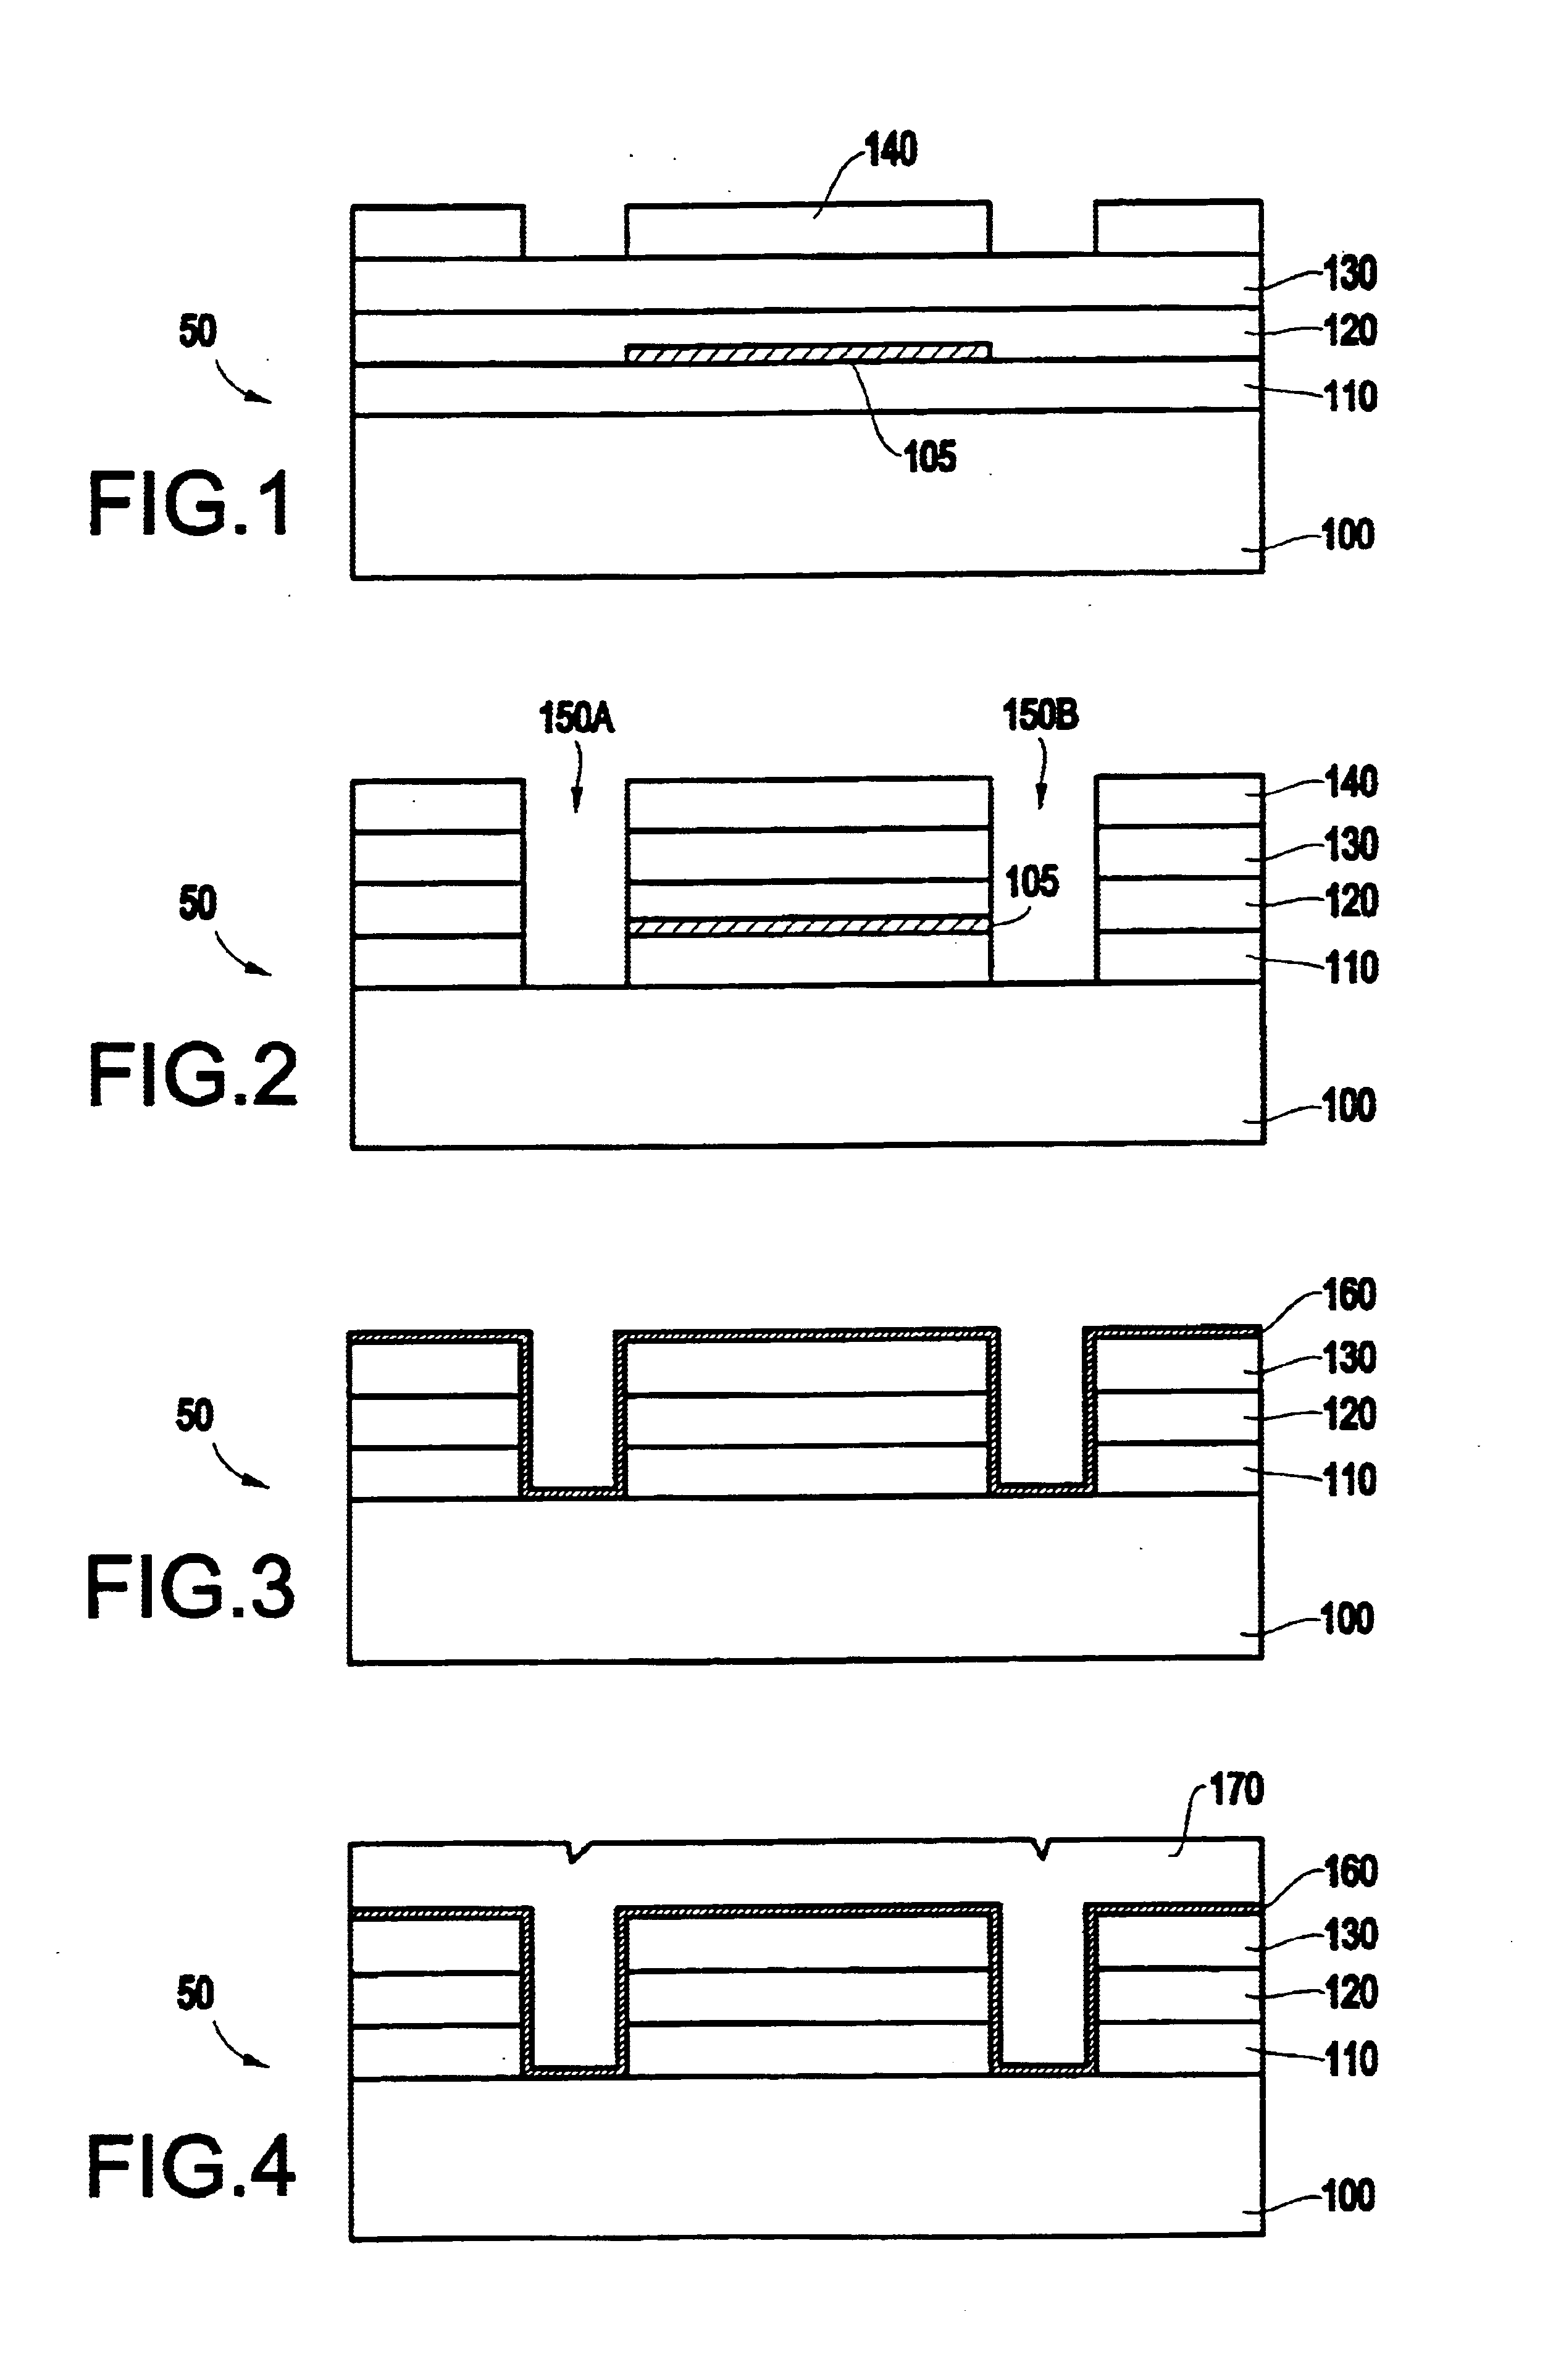 Polymer thin-film transistor with contact etch stops